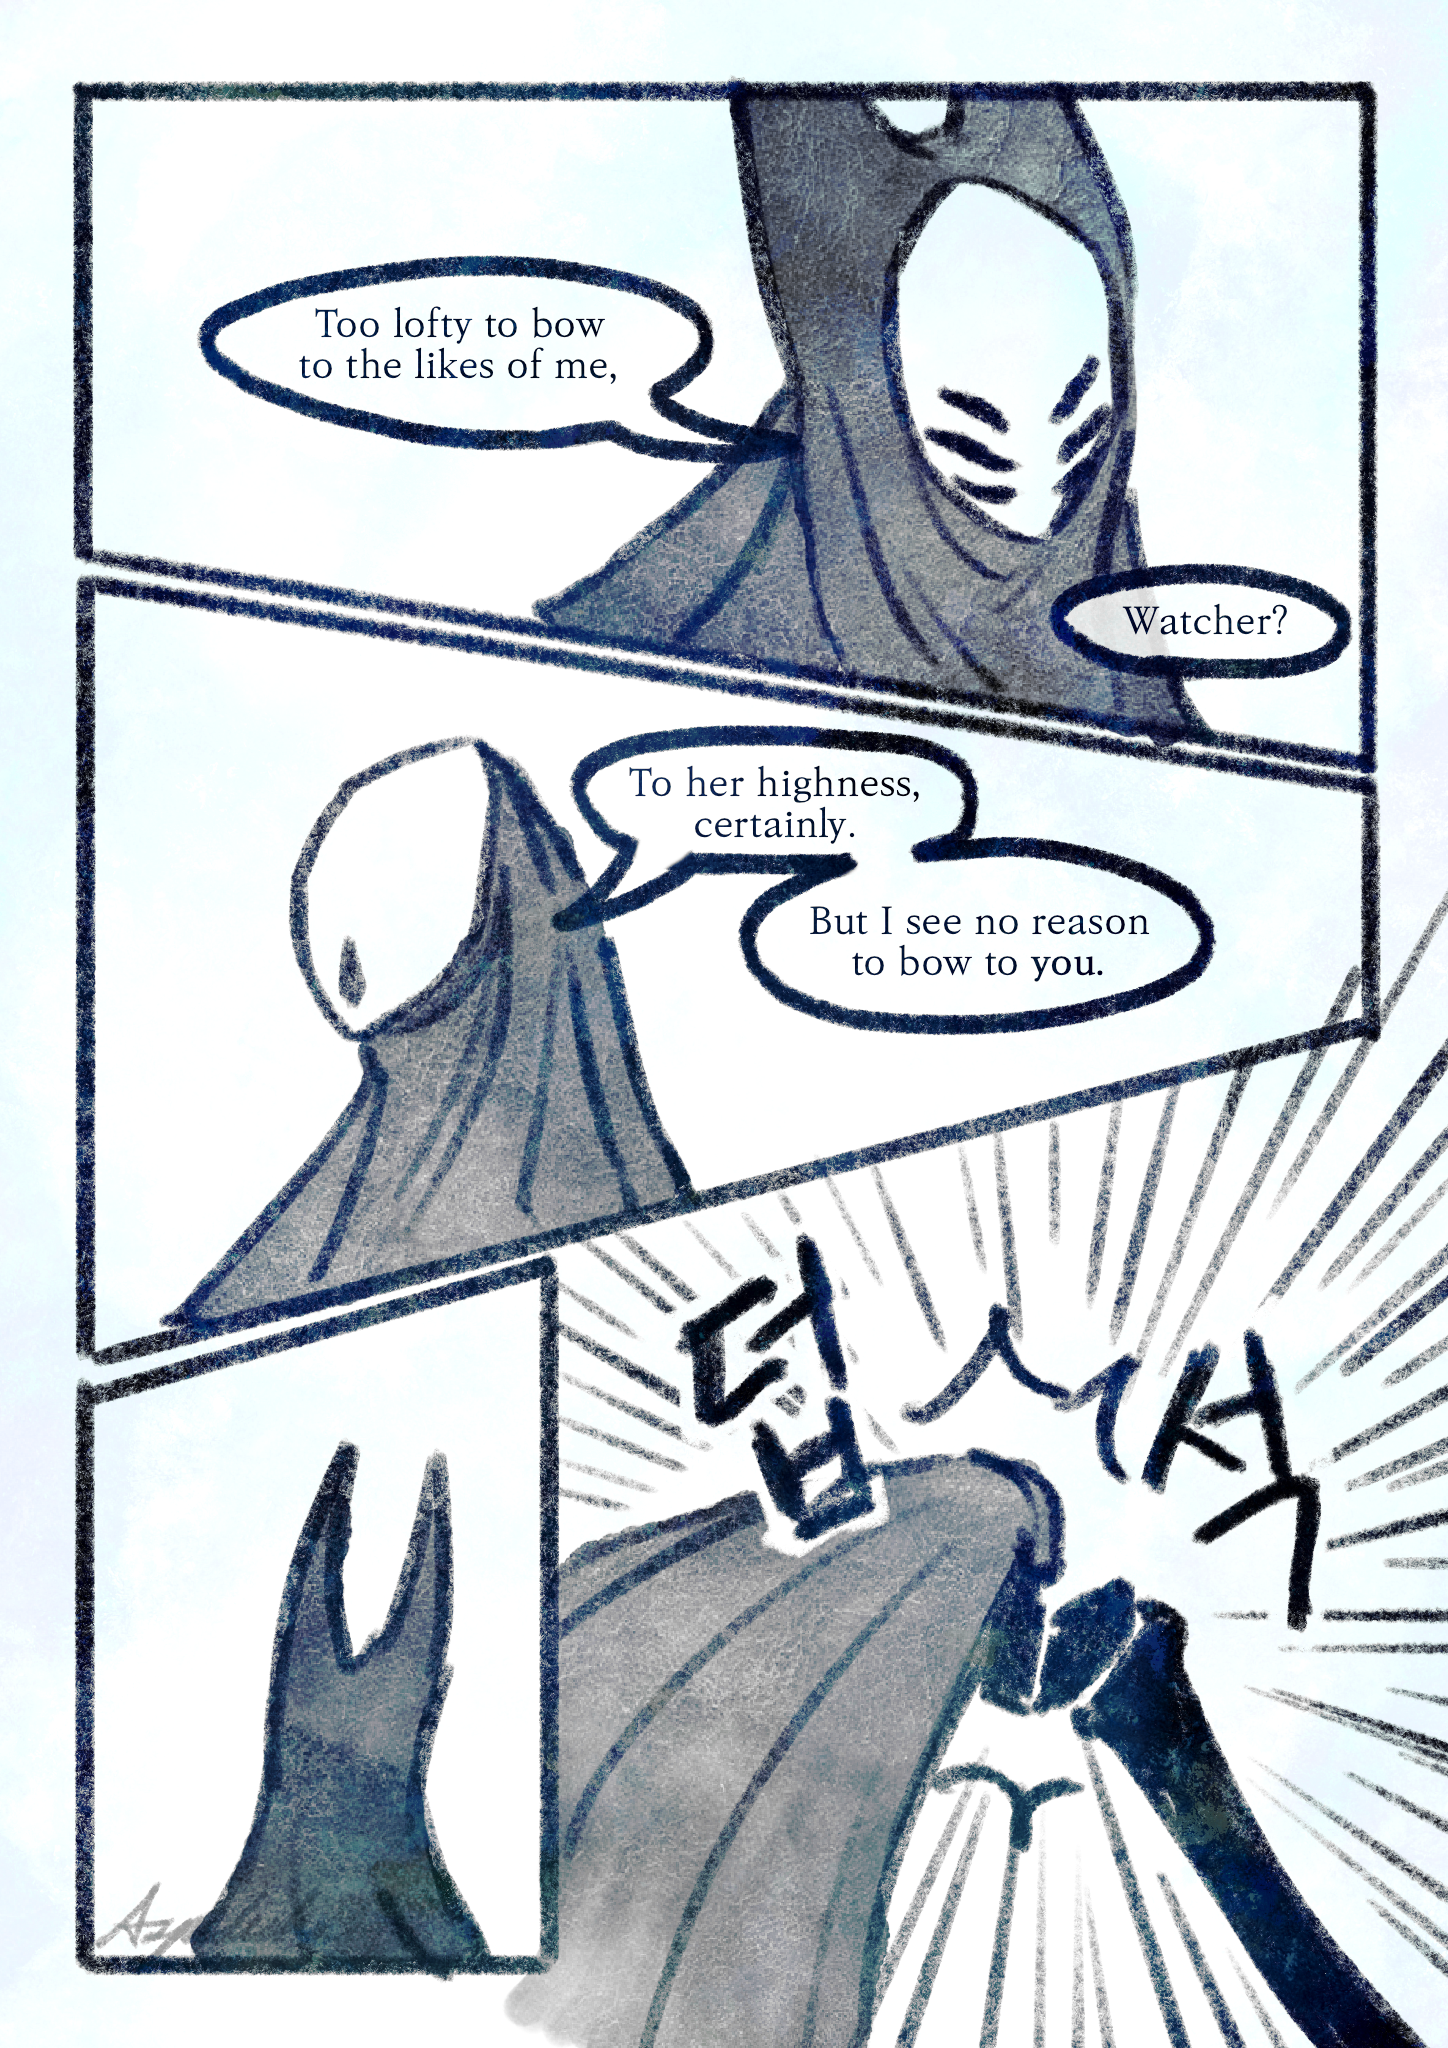 Comic page 2. Herrah glares at Lurien. Lurien taunts her, unfazed. Herrah stills, then grabs Lurien by the front of his cloak.